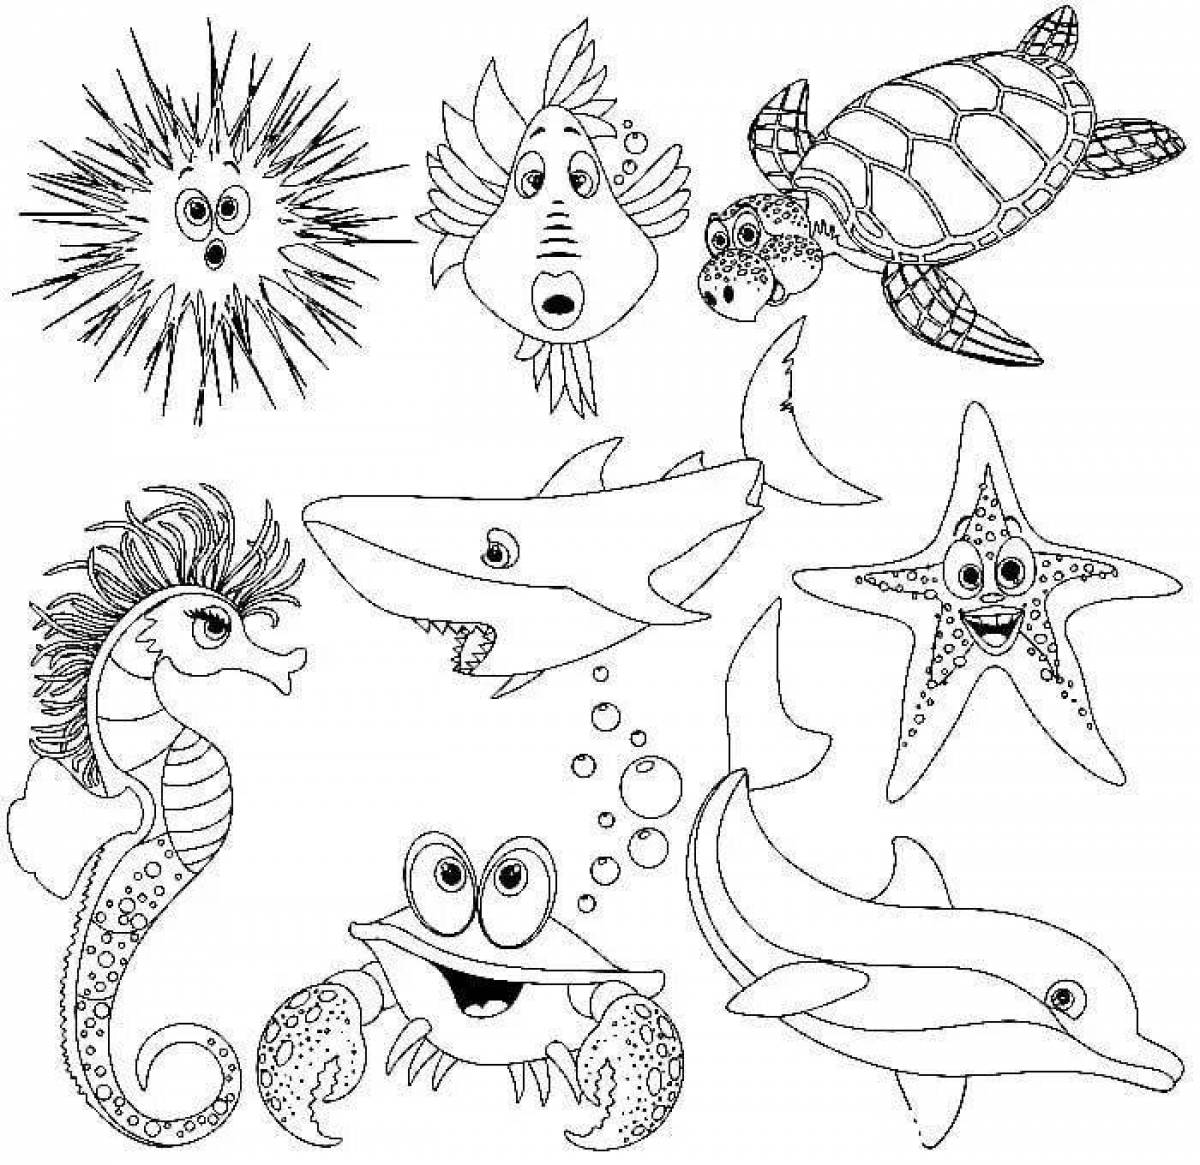 Joyful sea animals coloring pages for kids